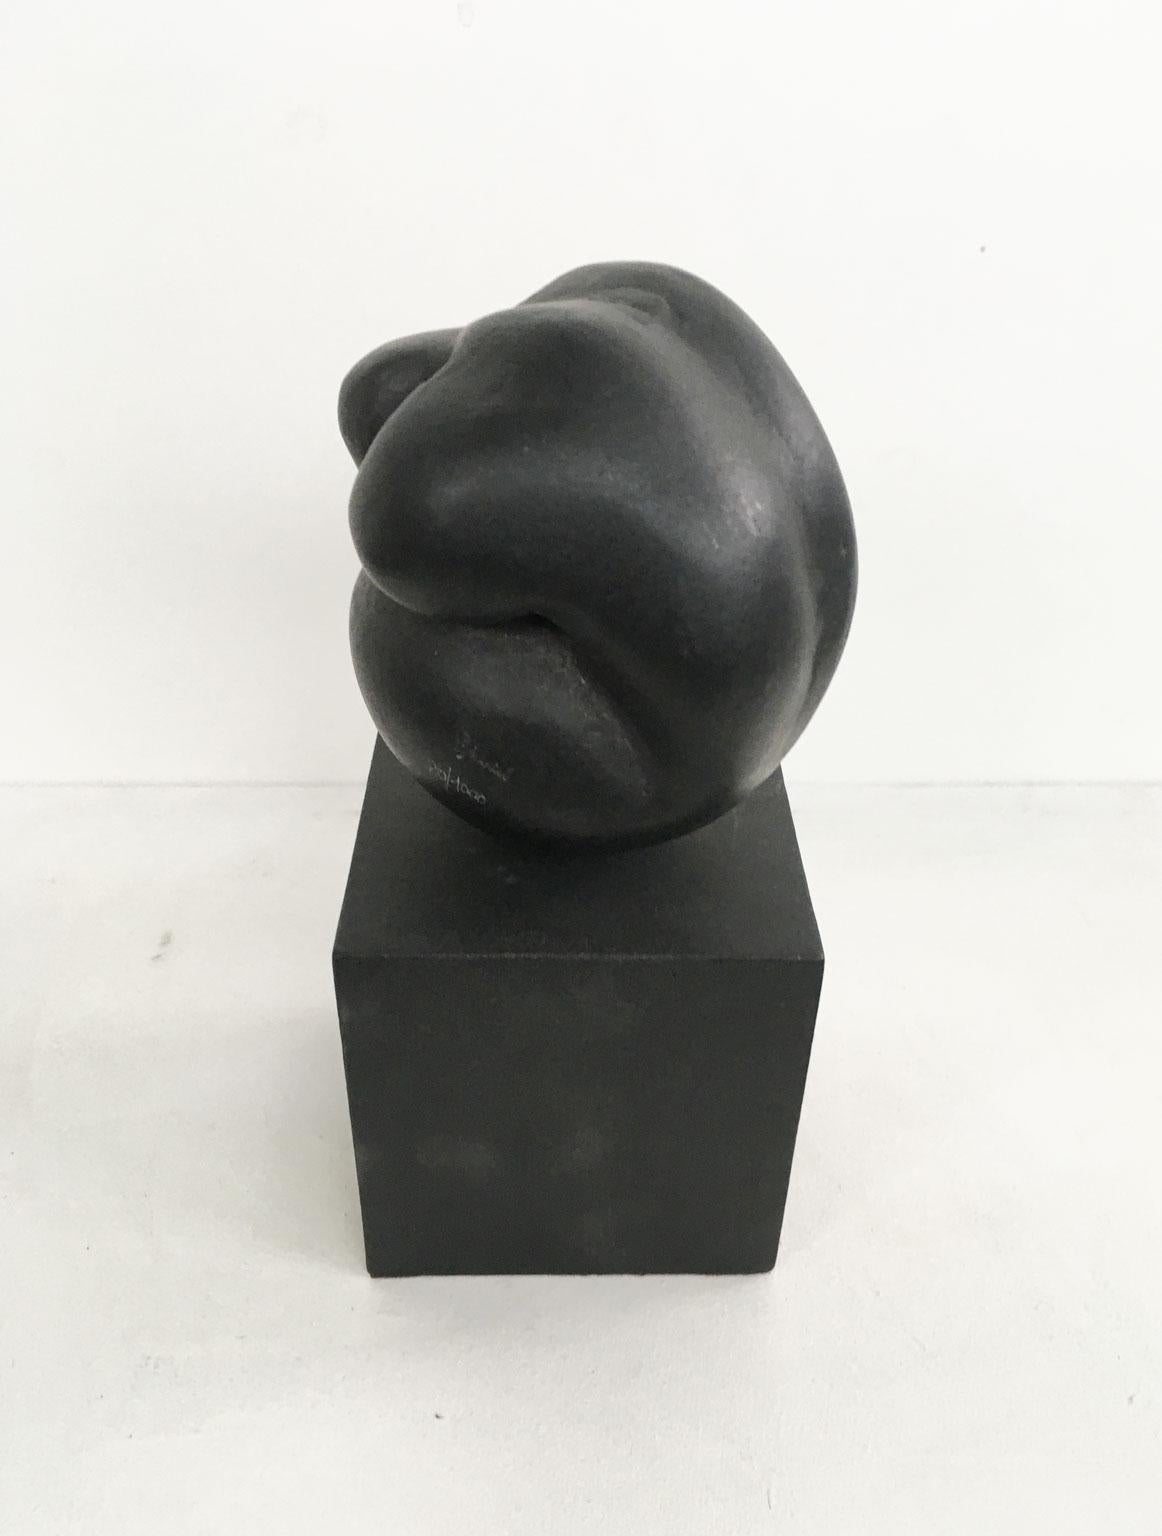 1988 Italy Black Aluminum Abstract Sculpture by Patrizia Guerresi Title Deji For Sale 9